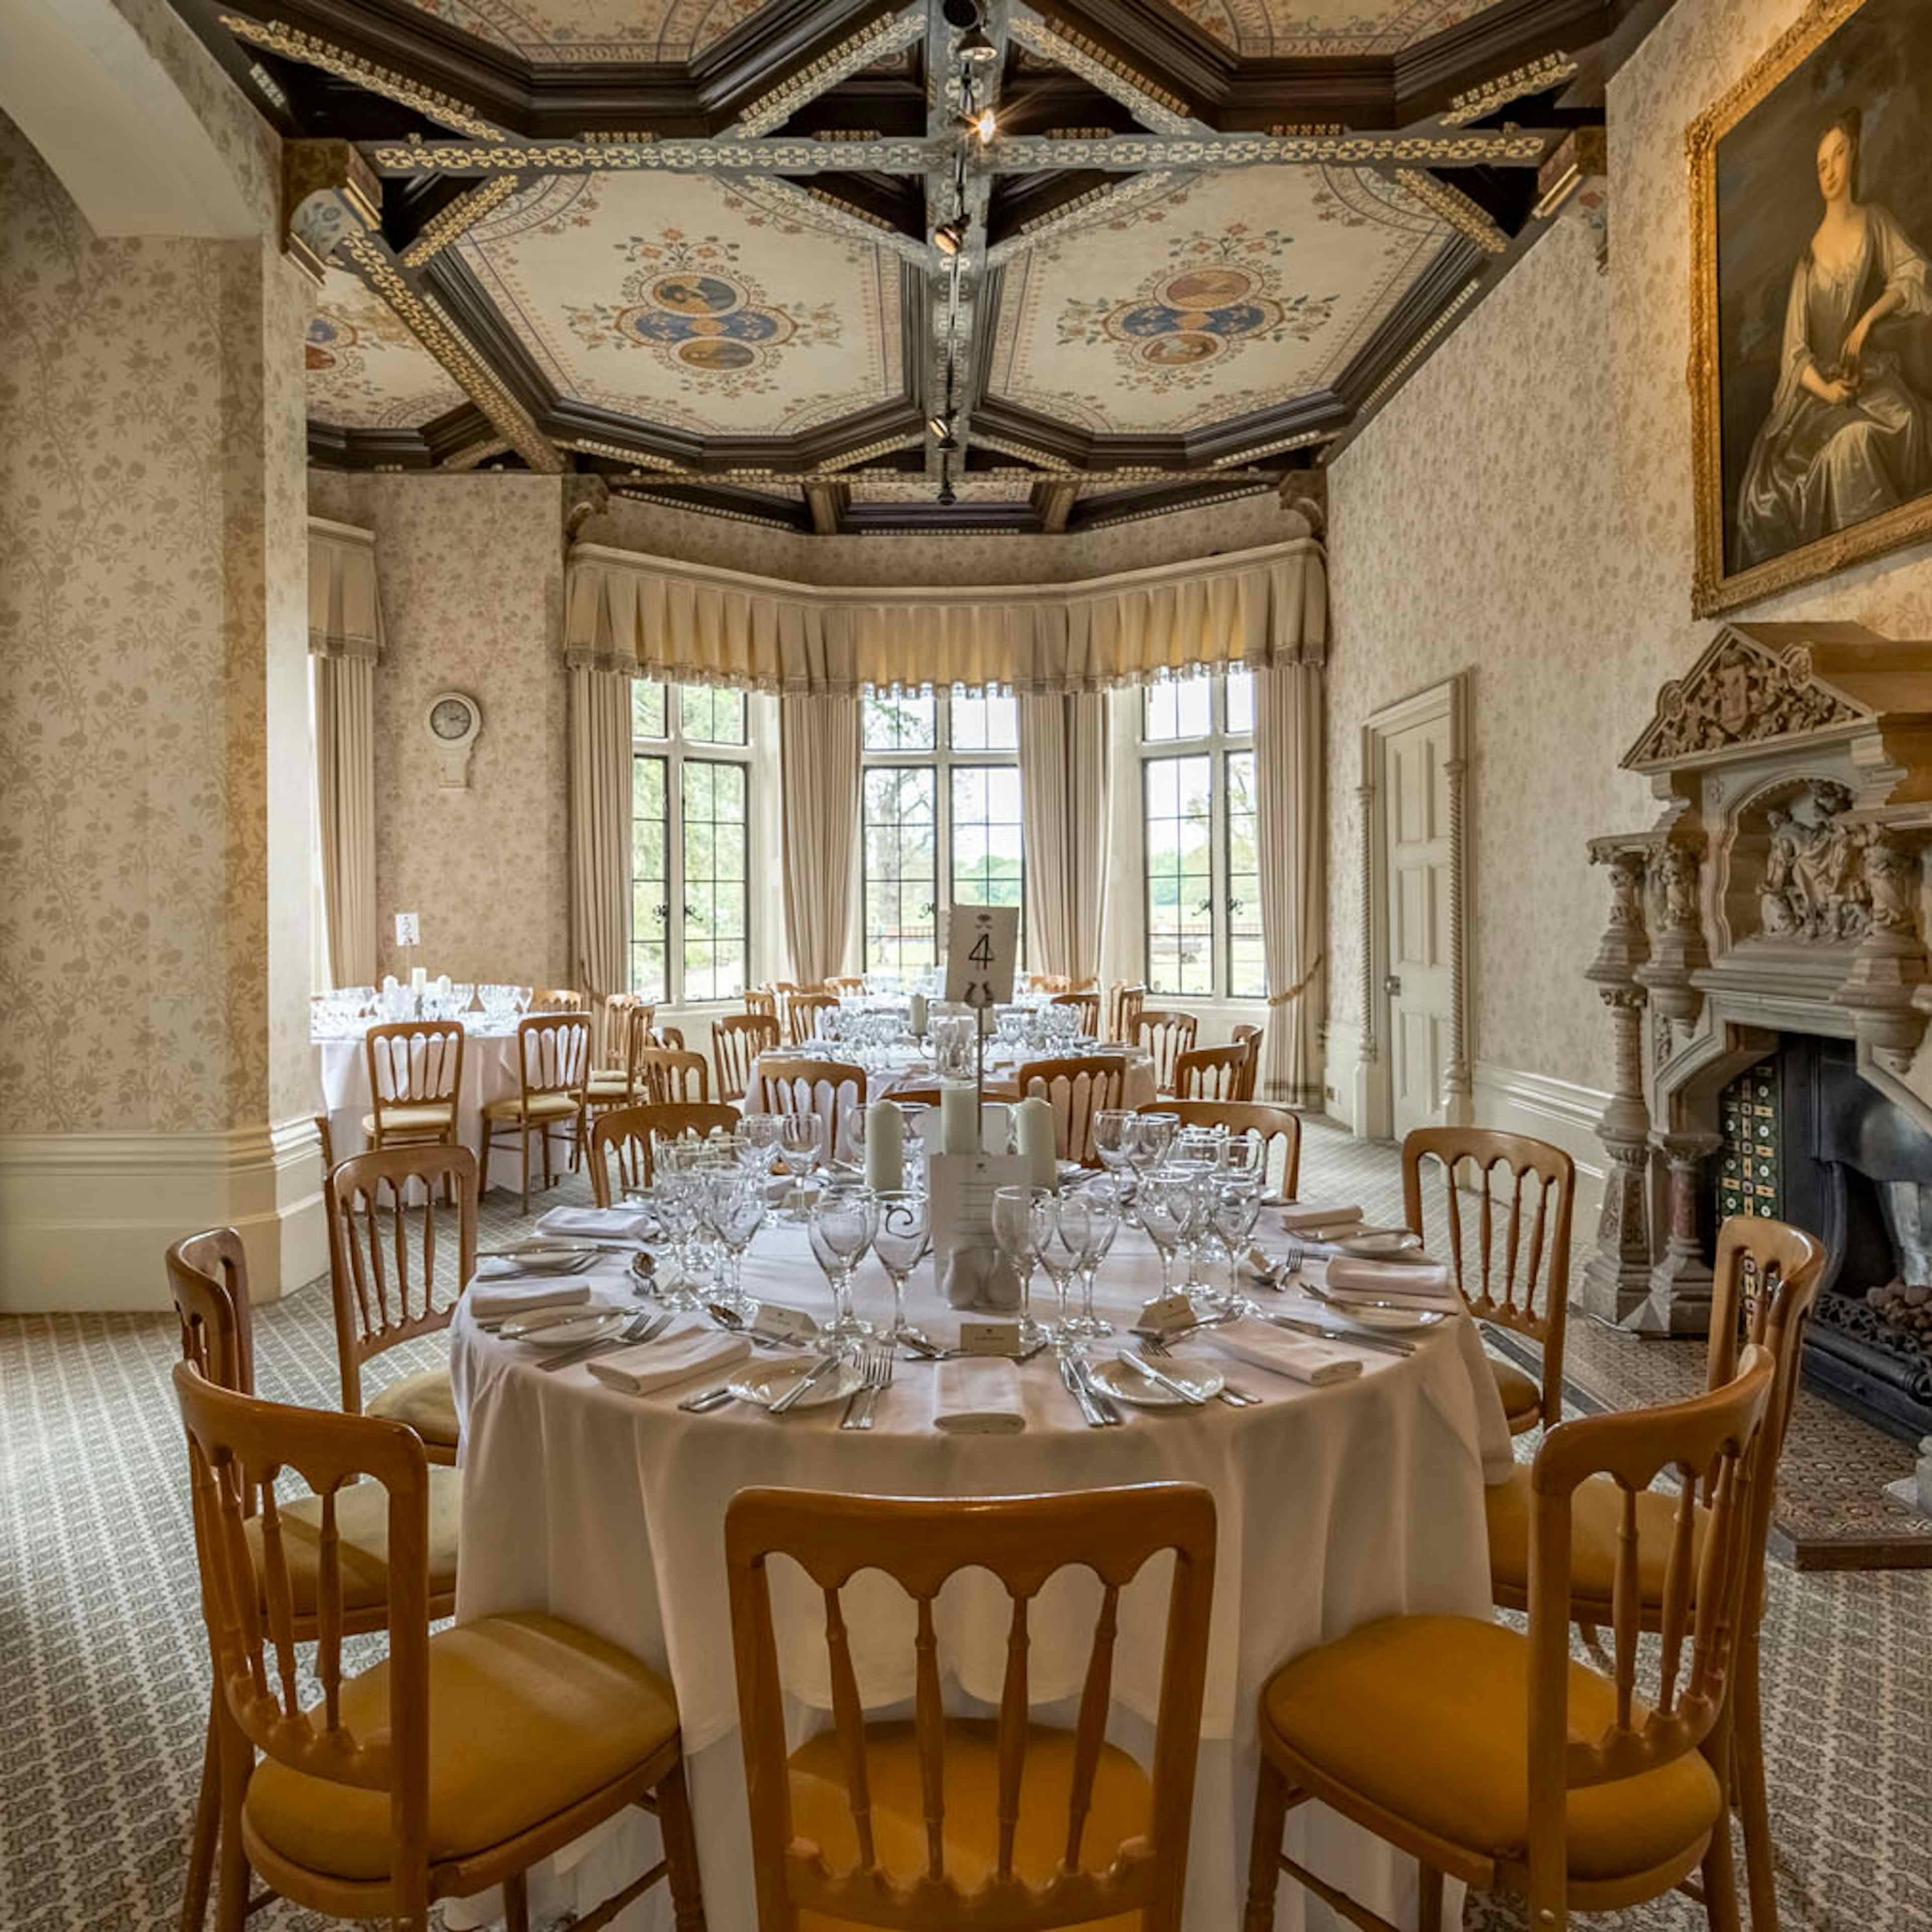 The Elvetham, Hampshire  - The Morning Room image 1